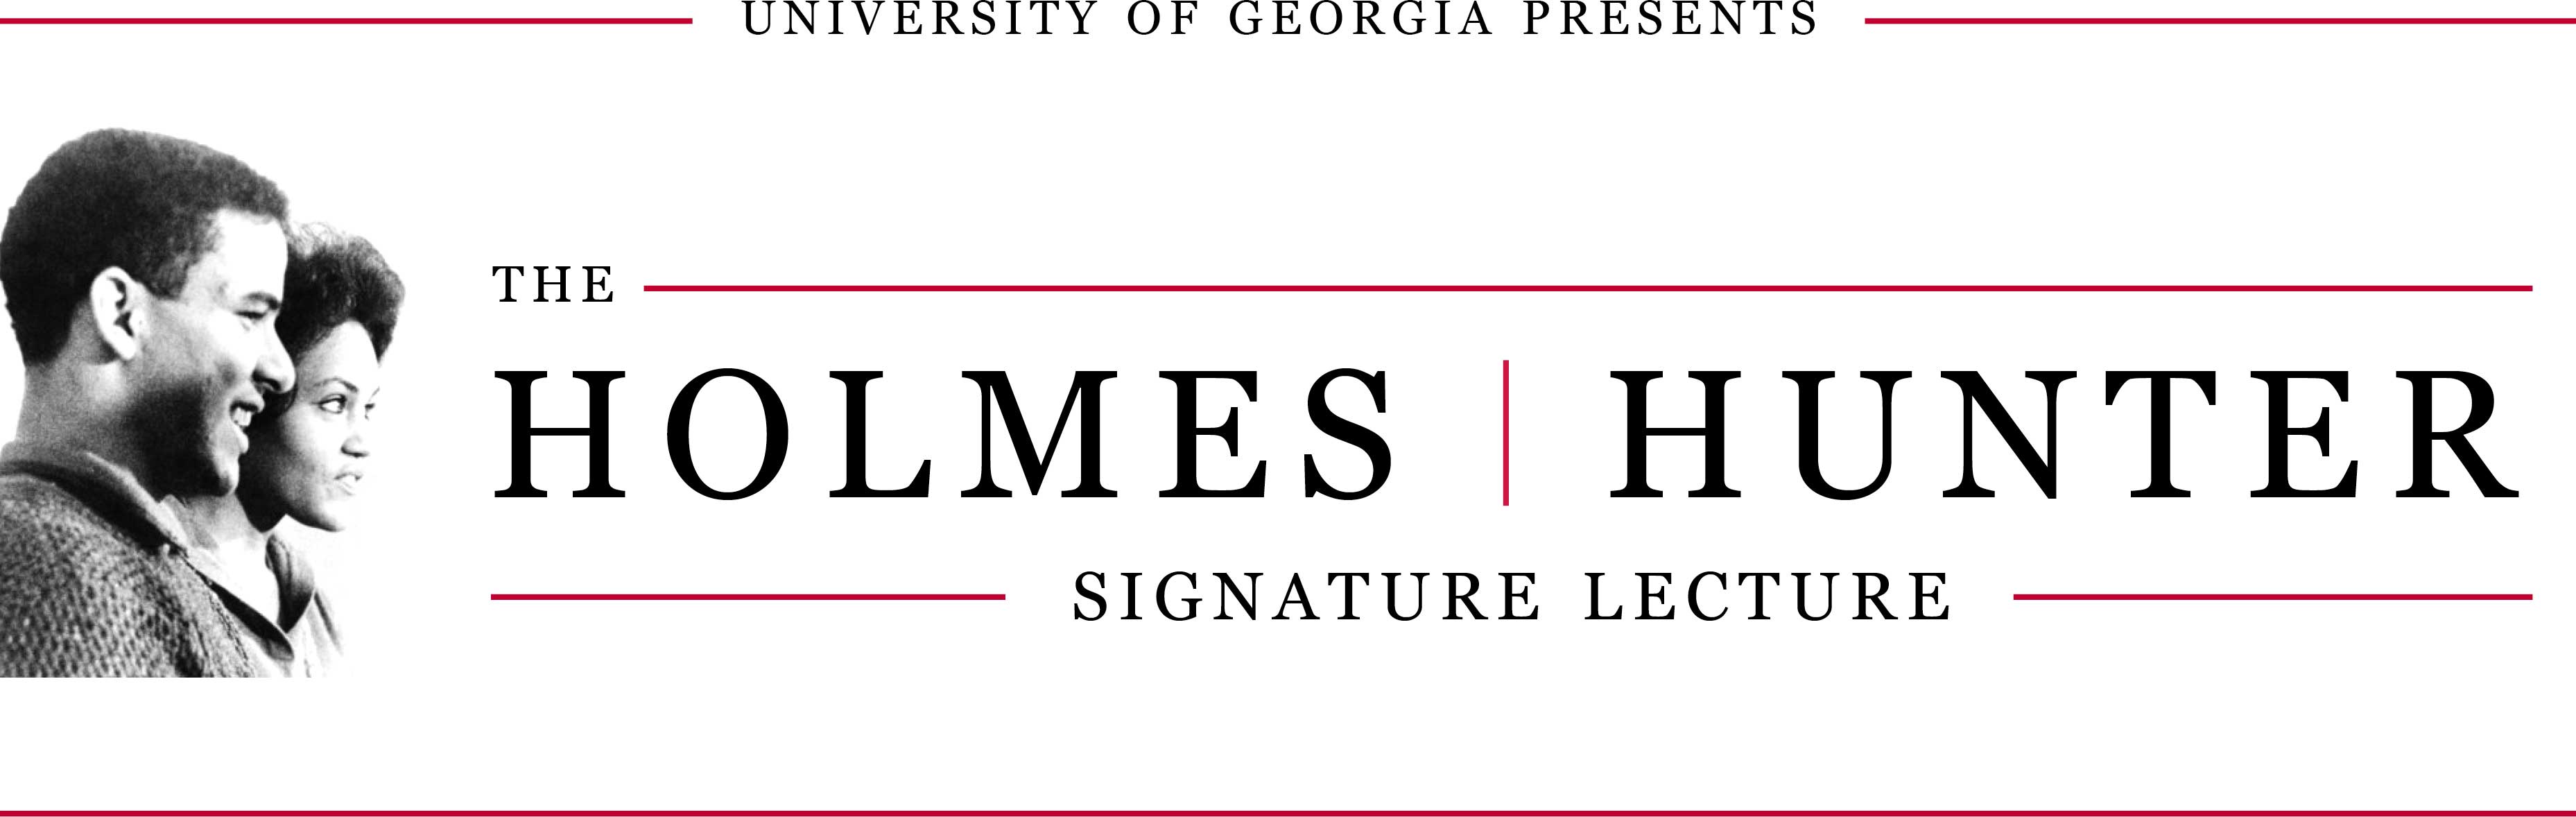 University of Georgia presents The Holmes-Hunter Signature Lecture